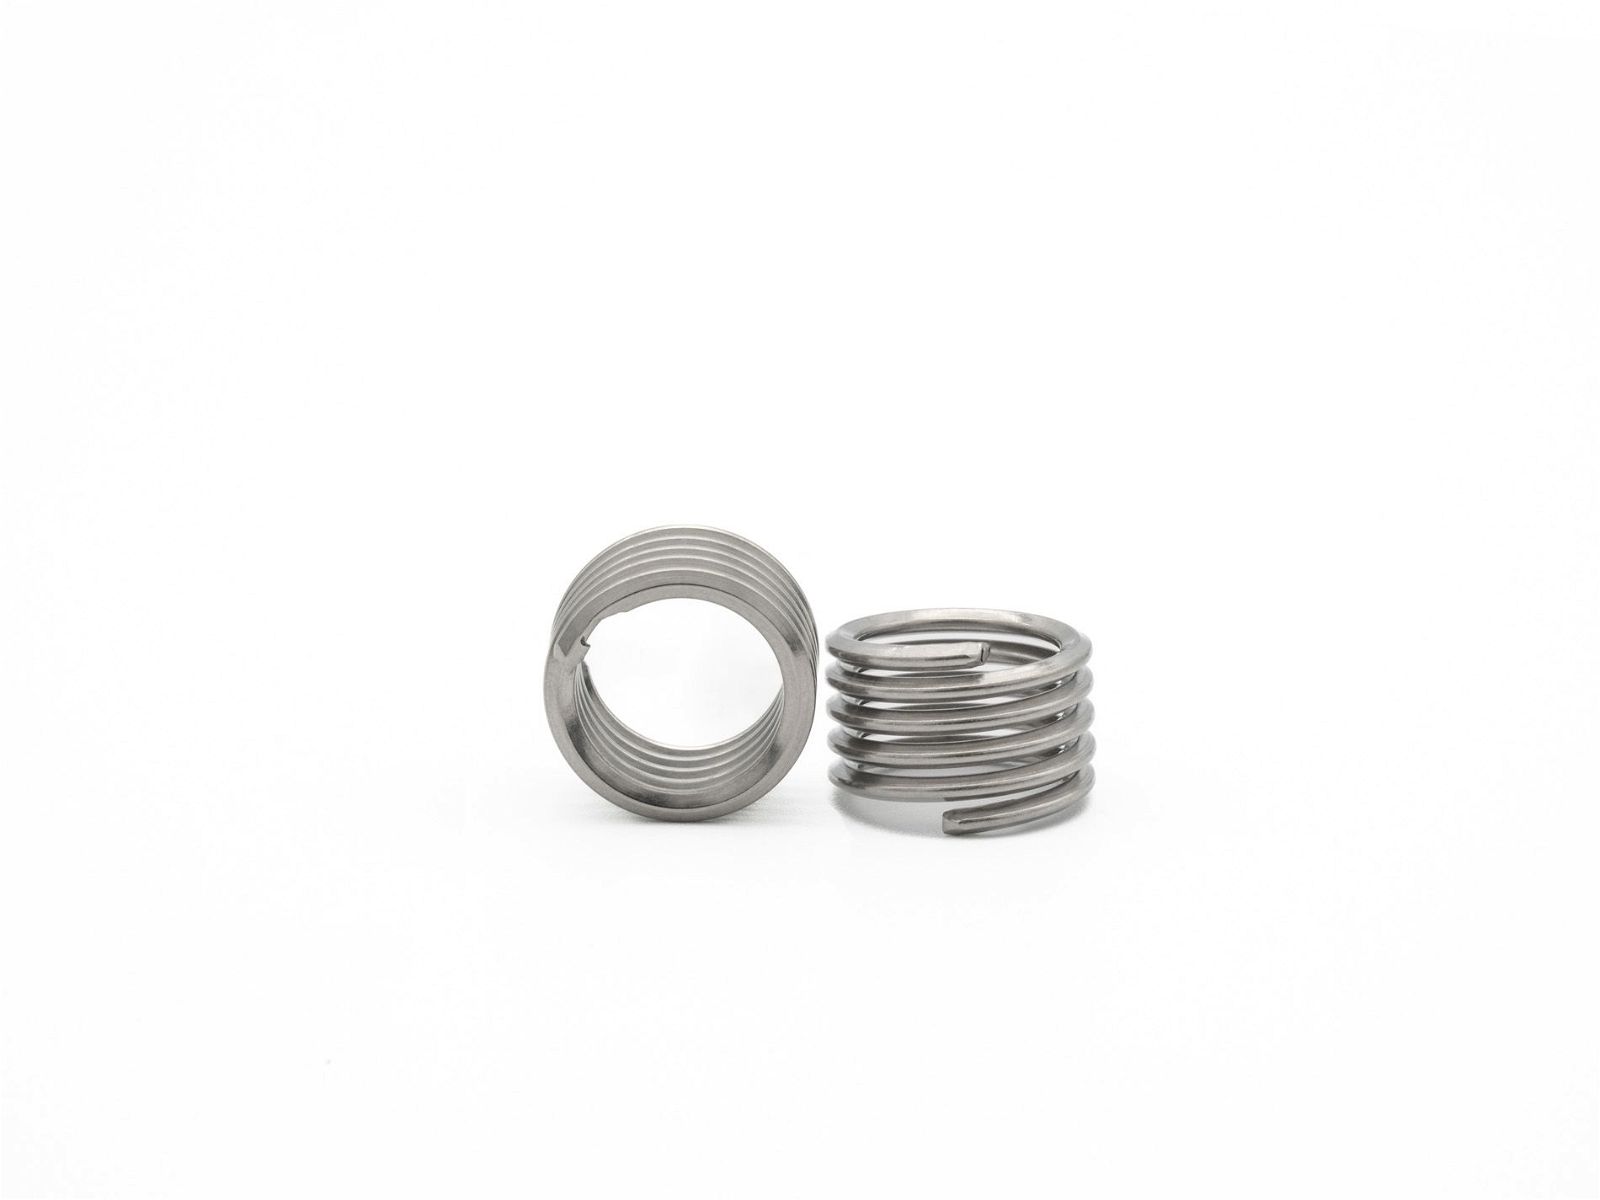 BaerCoil NoTang Wire Thread Inserts M 3 x 0.5 - 1.0 D (3 mm) - 100 pcs.